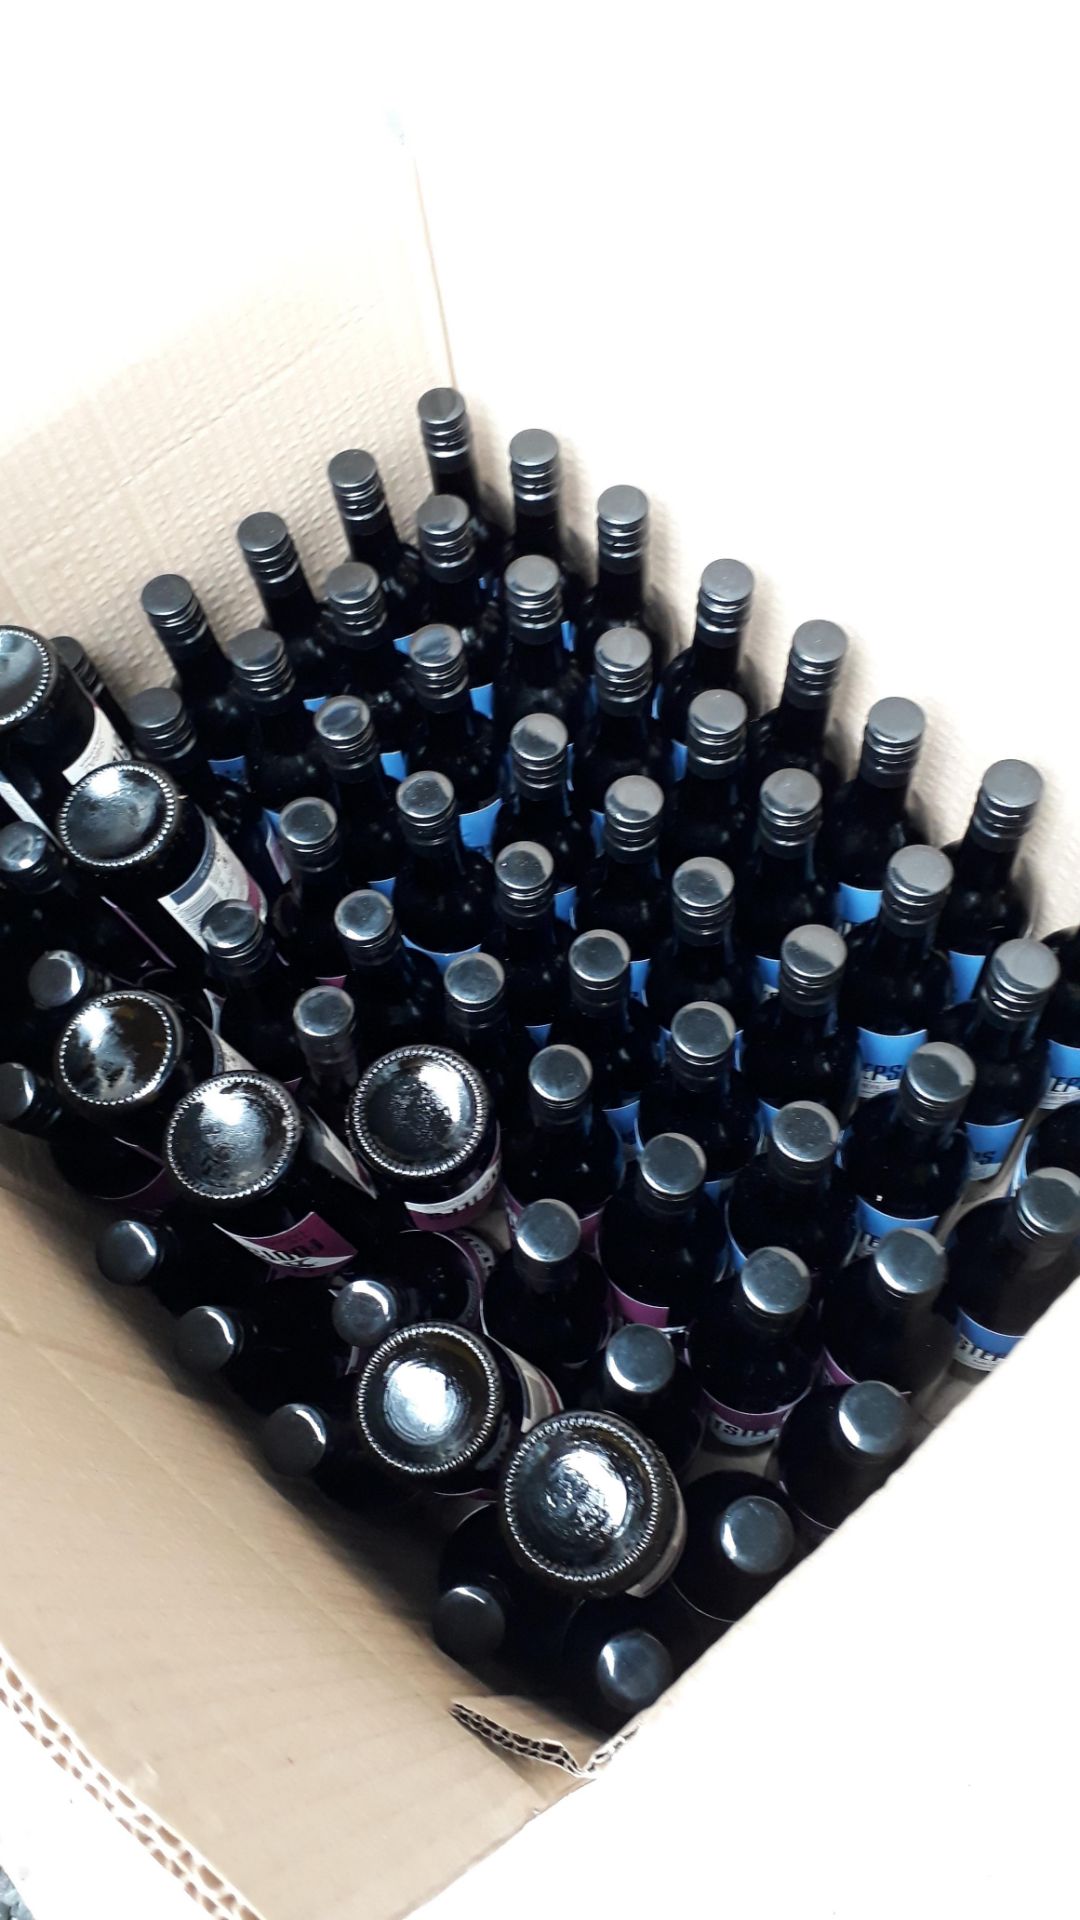 Large Quantity of Alcohol and Beverage Stock - Image 10 of 117